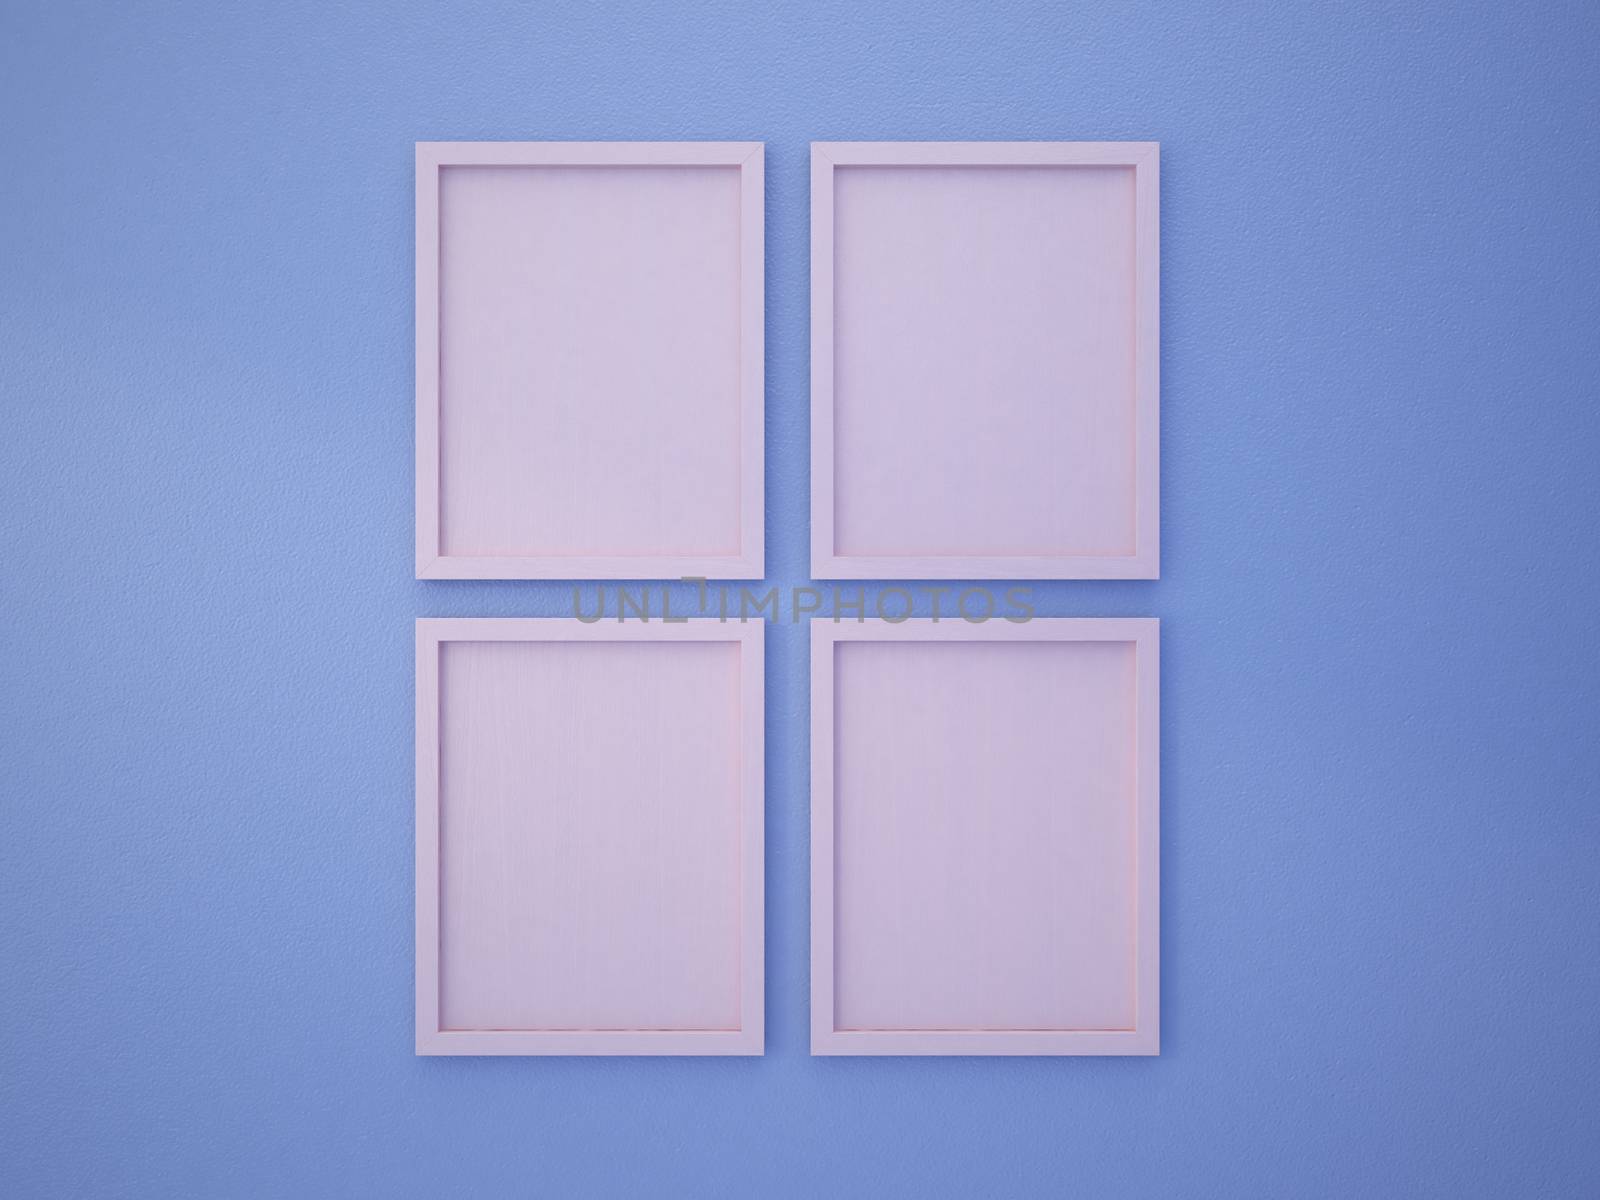 Rose Quartz blank frame on Serenity Blue color wall by chingraph